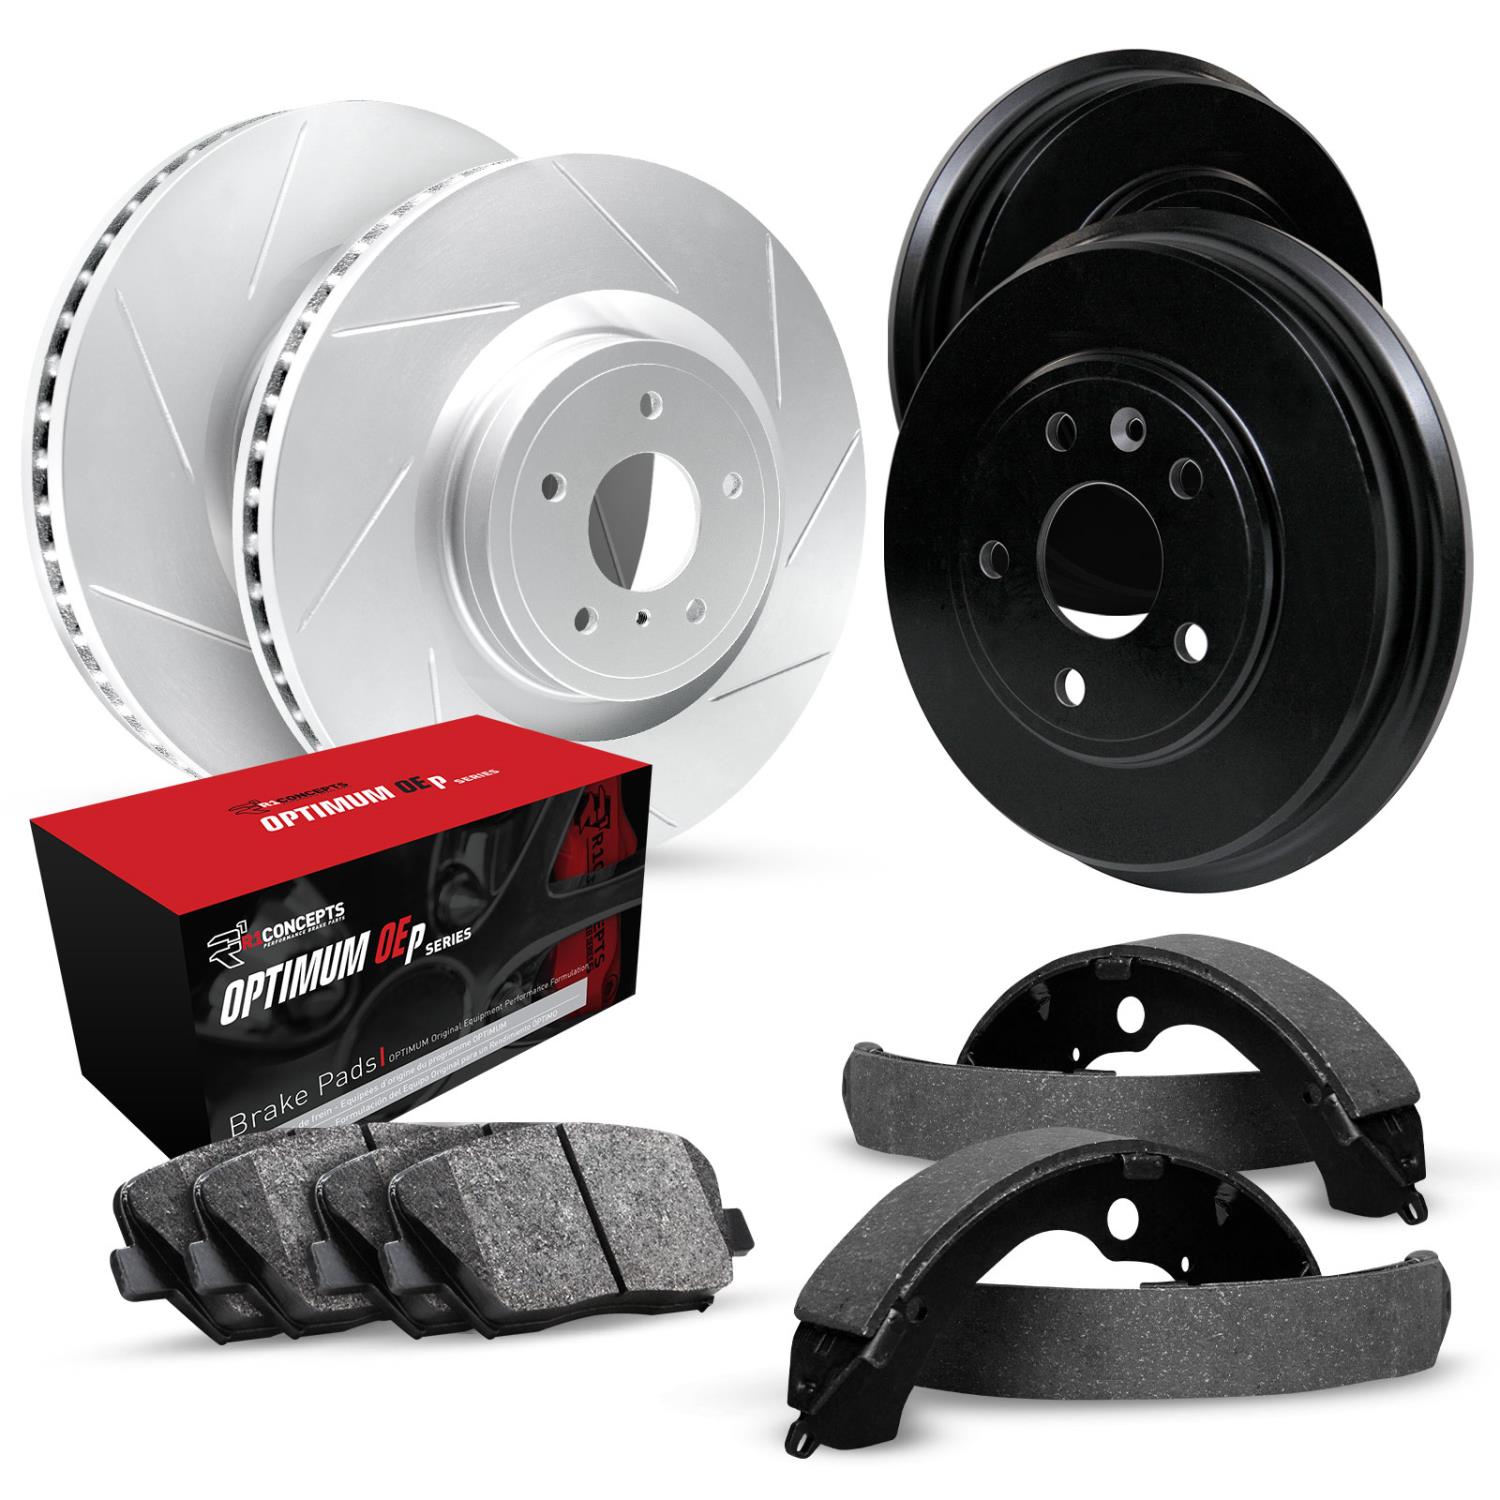 GEO-Carbon Slotted Brake Rotor & Drum Set w/Optimum OE Pads & Shoes, 1995-1997 Ford/Lincoln/Mercury/Mazda